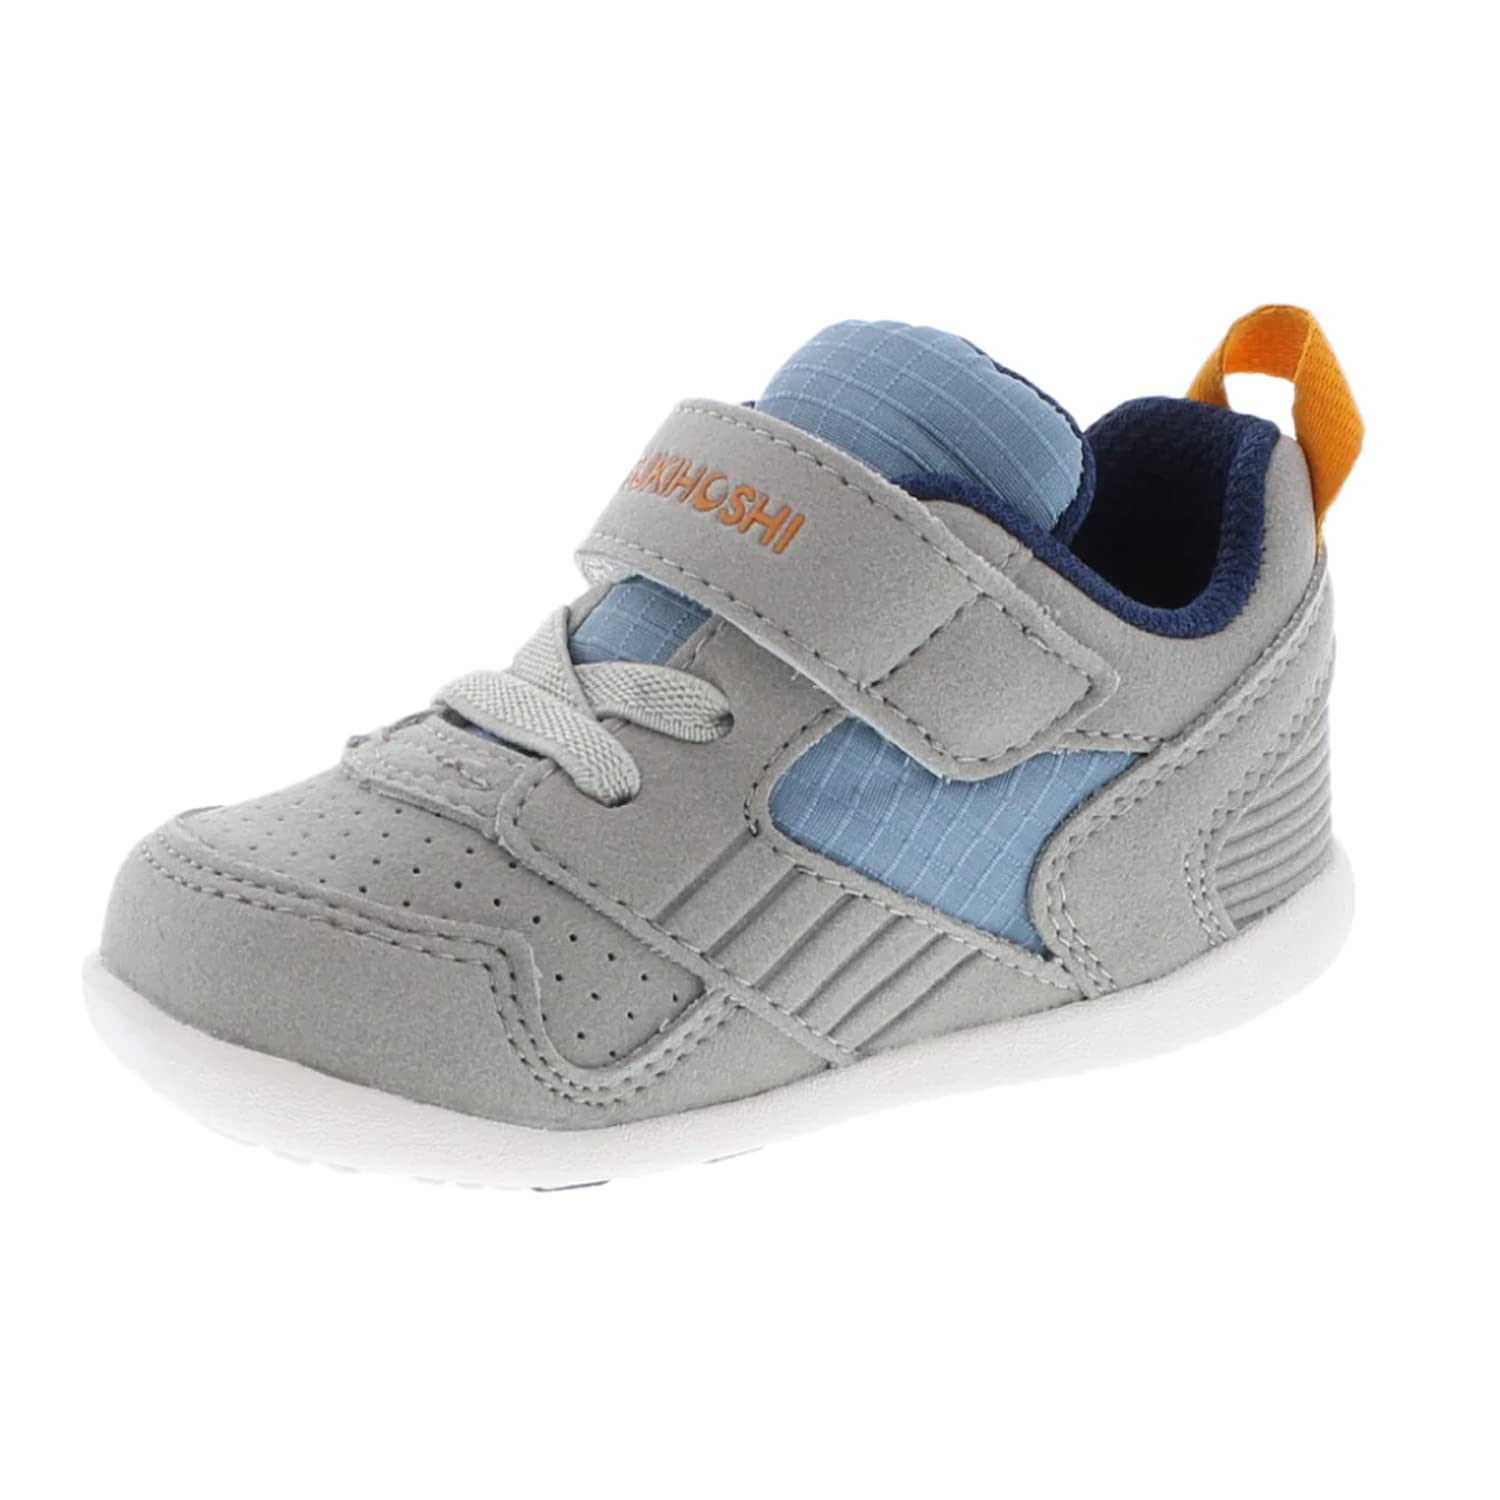 TSUKIHOSHI 2510 Racer Strap-Closure Machine-Washable Baby Sneaker Shoe with Wide Toe Box and Slip-Resistant, Non-Marking Outsole - for Infants and Toddlers, Ages 0-4